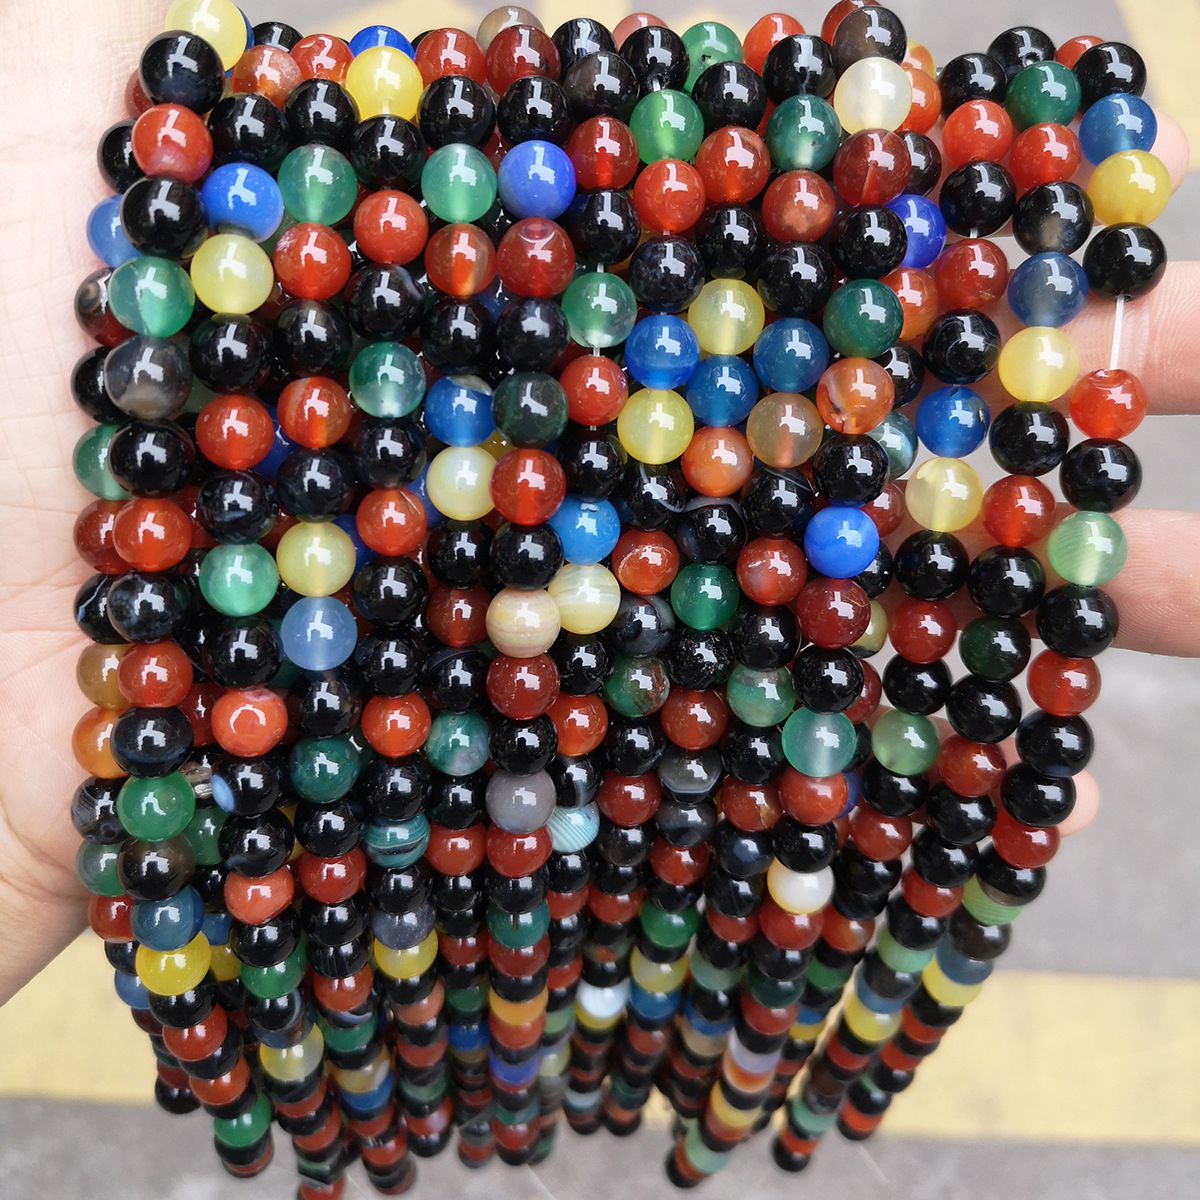 Glossy colorful agate 10mm 37 pcs